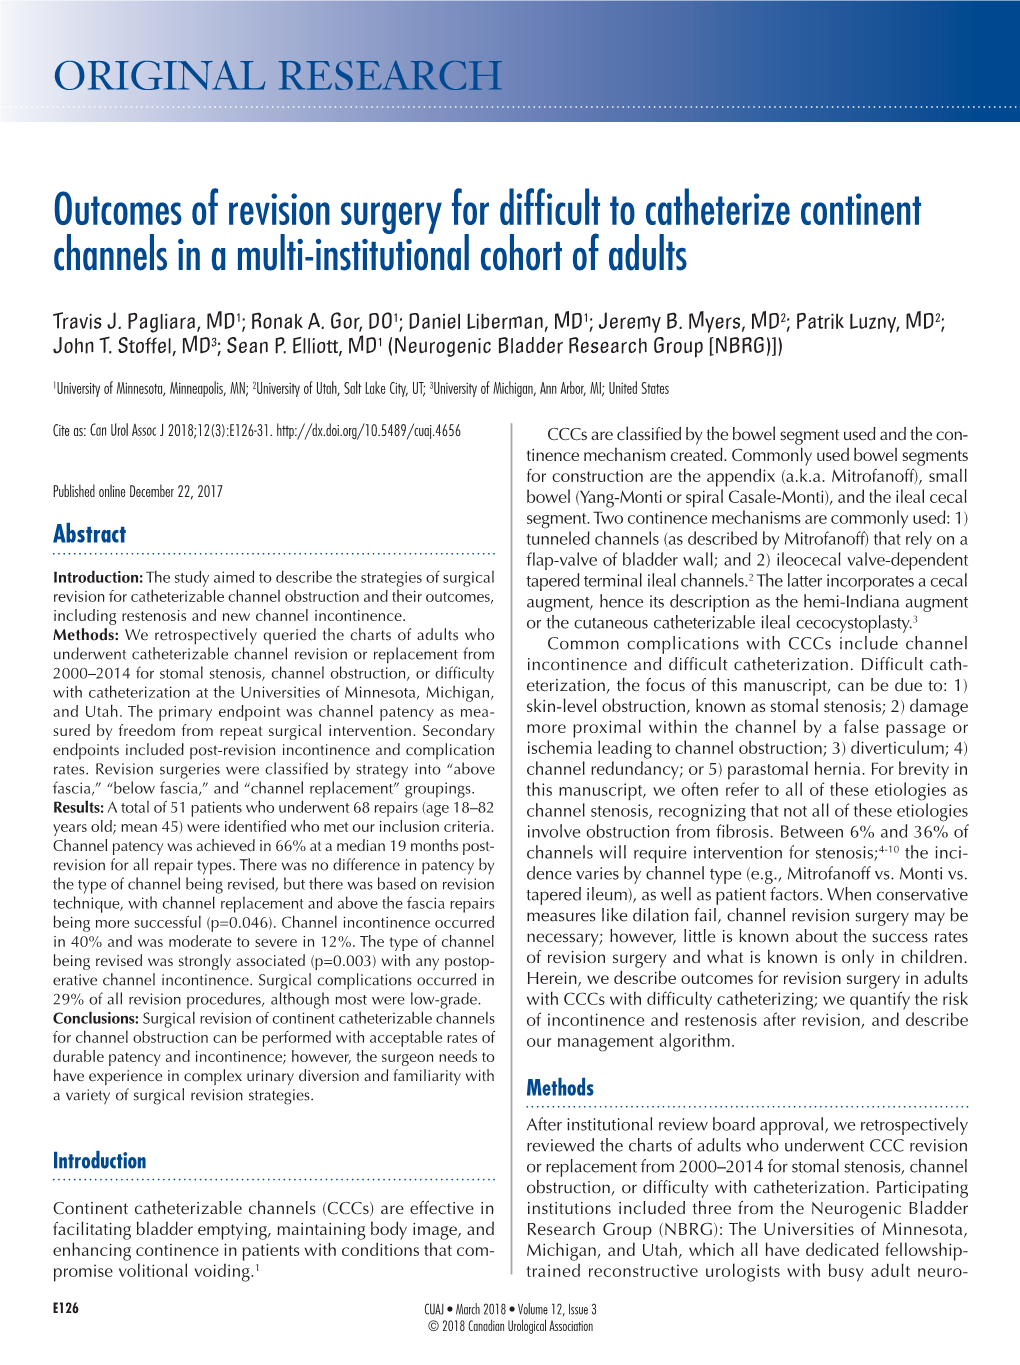 Outcomes of Revision Surgery for Difficult to Catheterize Continent Channels in a Multi-Institutional Cohort of Adults